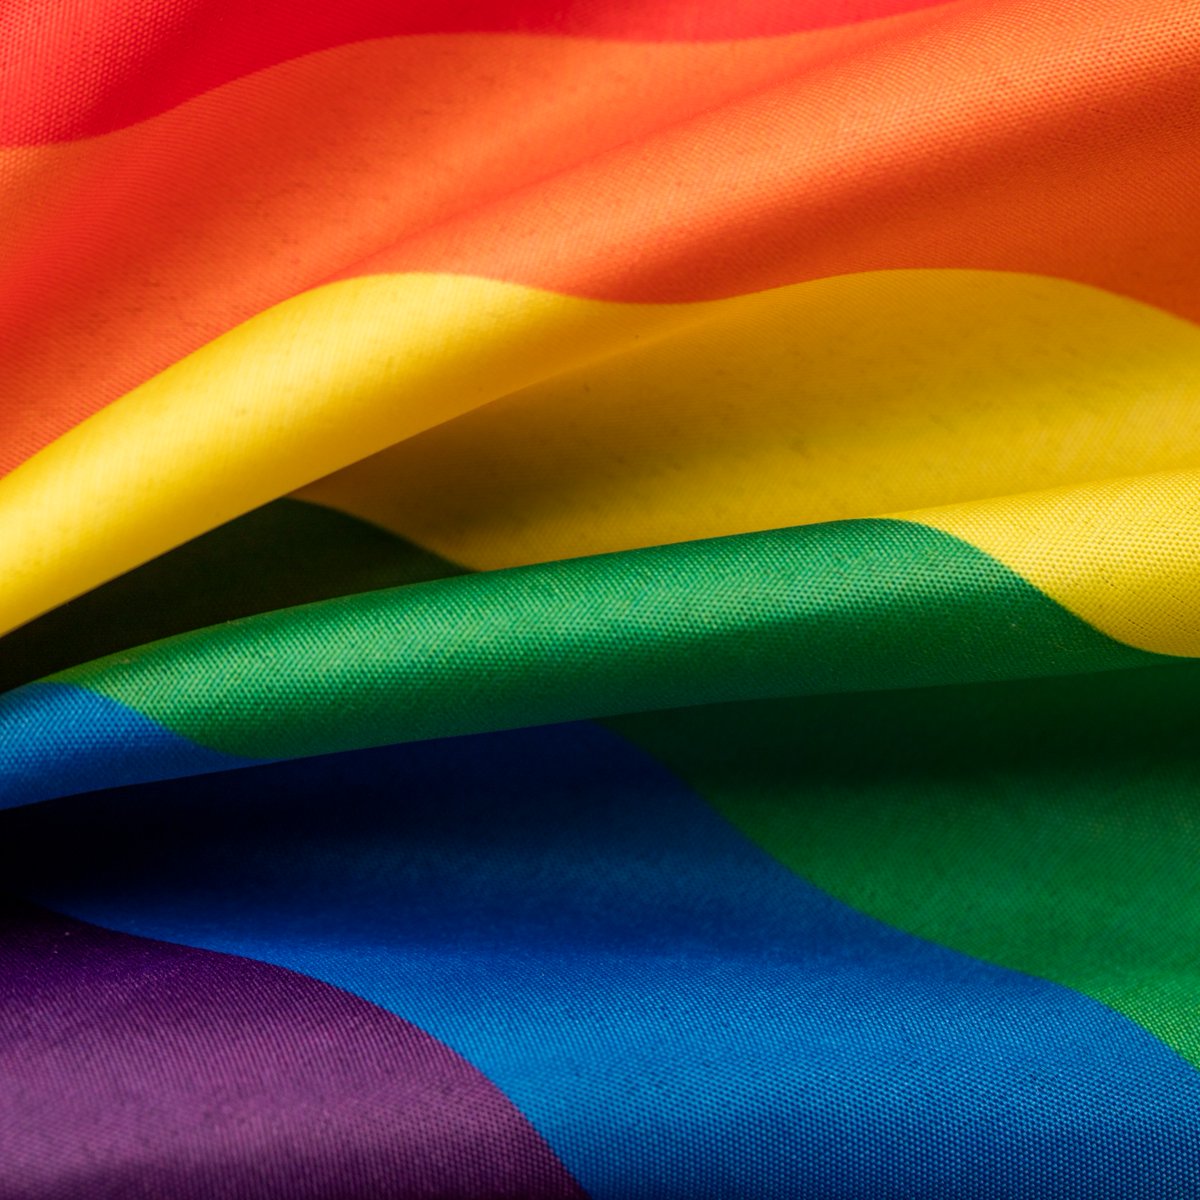 Today is the International Day Against Homophobia, Transphobia and Biphobia, a day that affirms the right of all members of 2SLGBTQQIA+ communities to live freely as themselves in all places—at school, at work, in society, and at home. #RedDeer #LoveIsLove bit.ly/3wsns2l